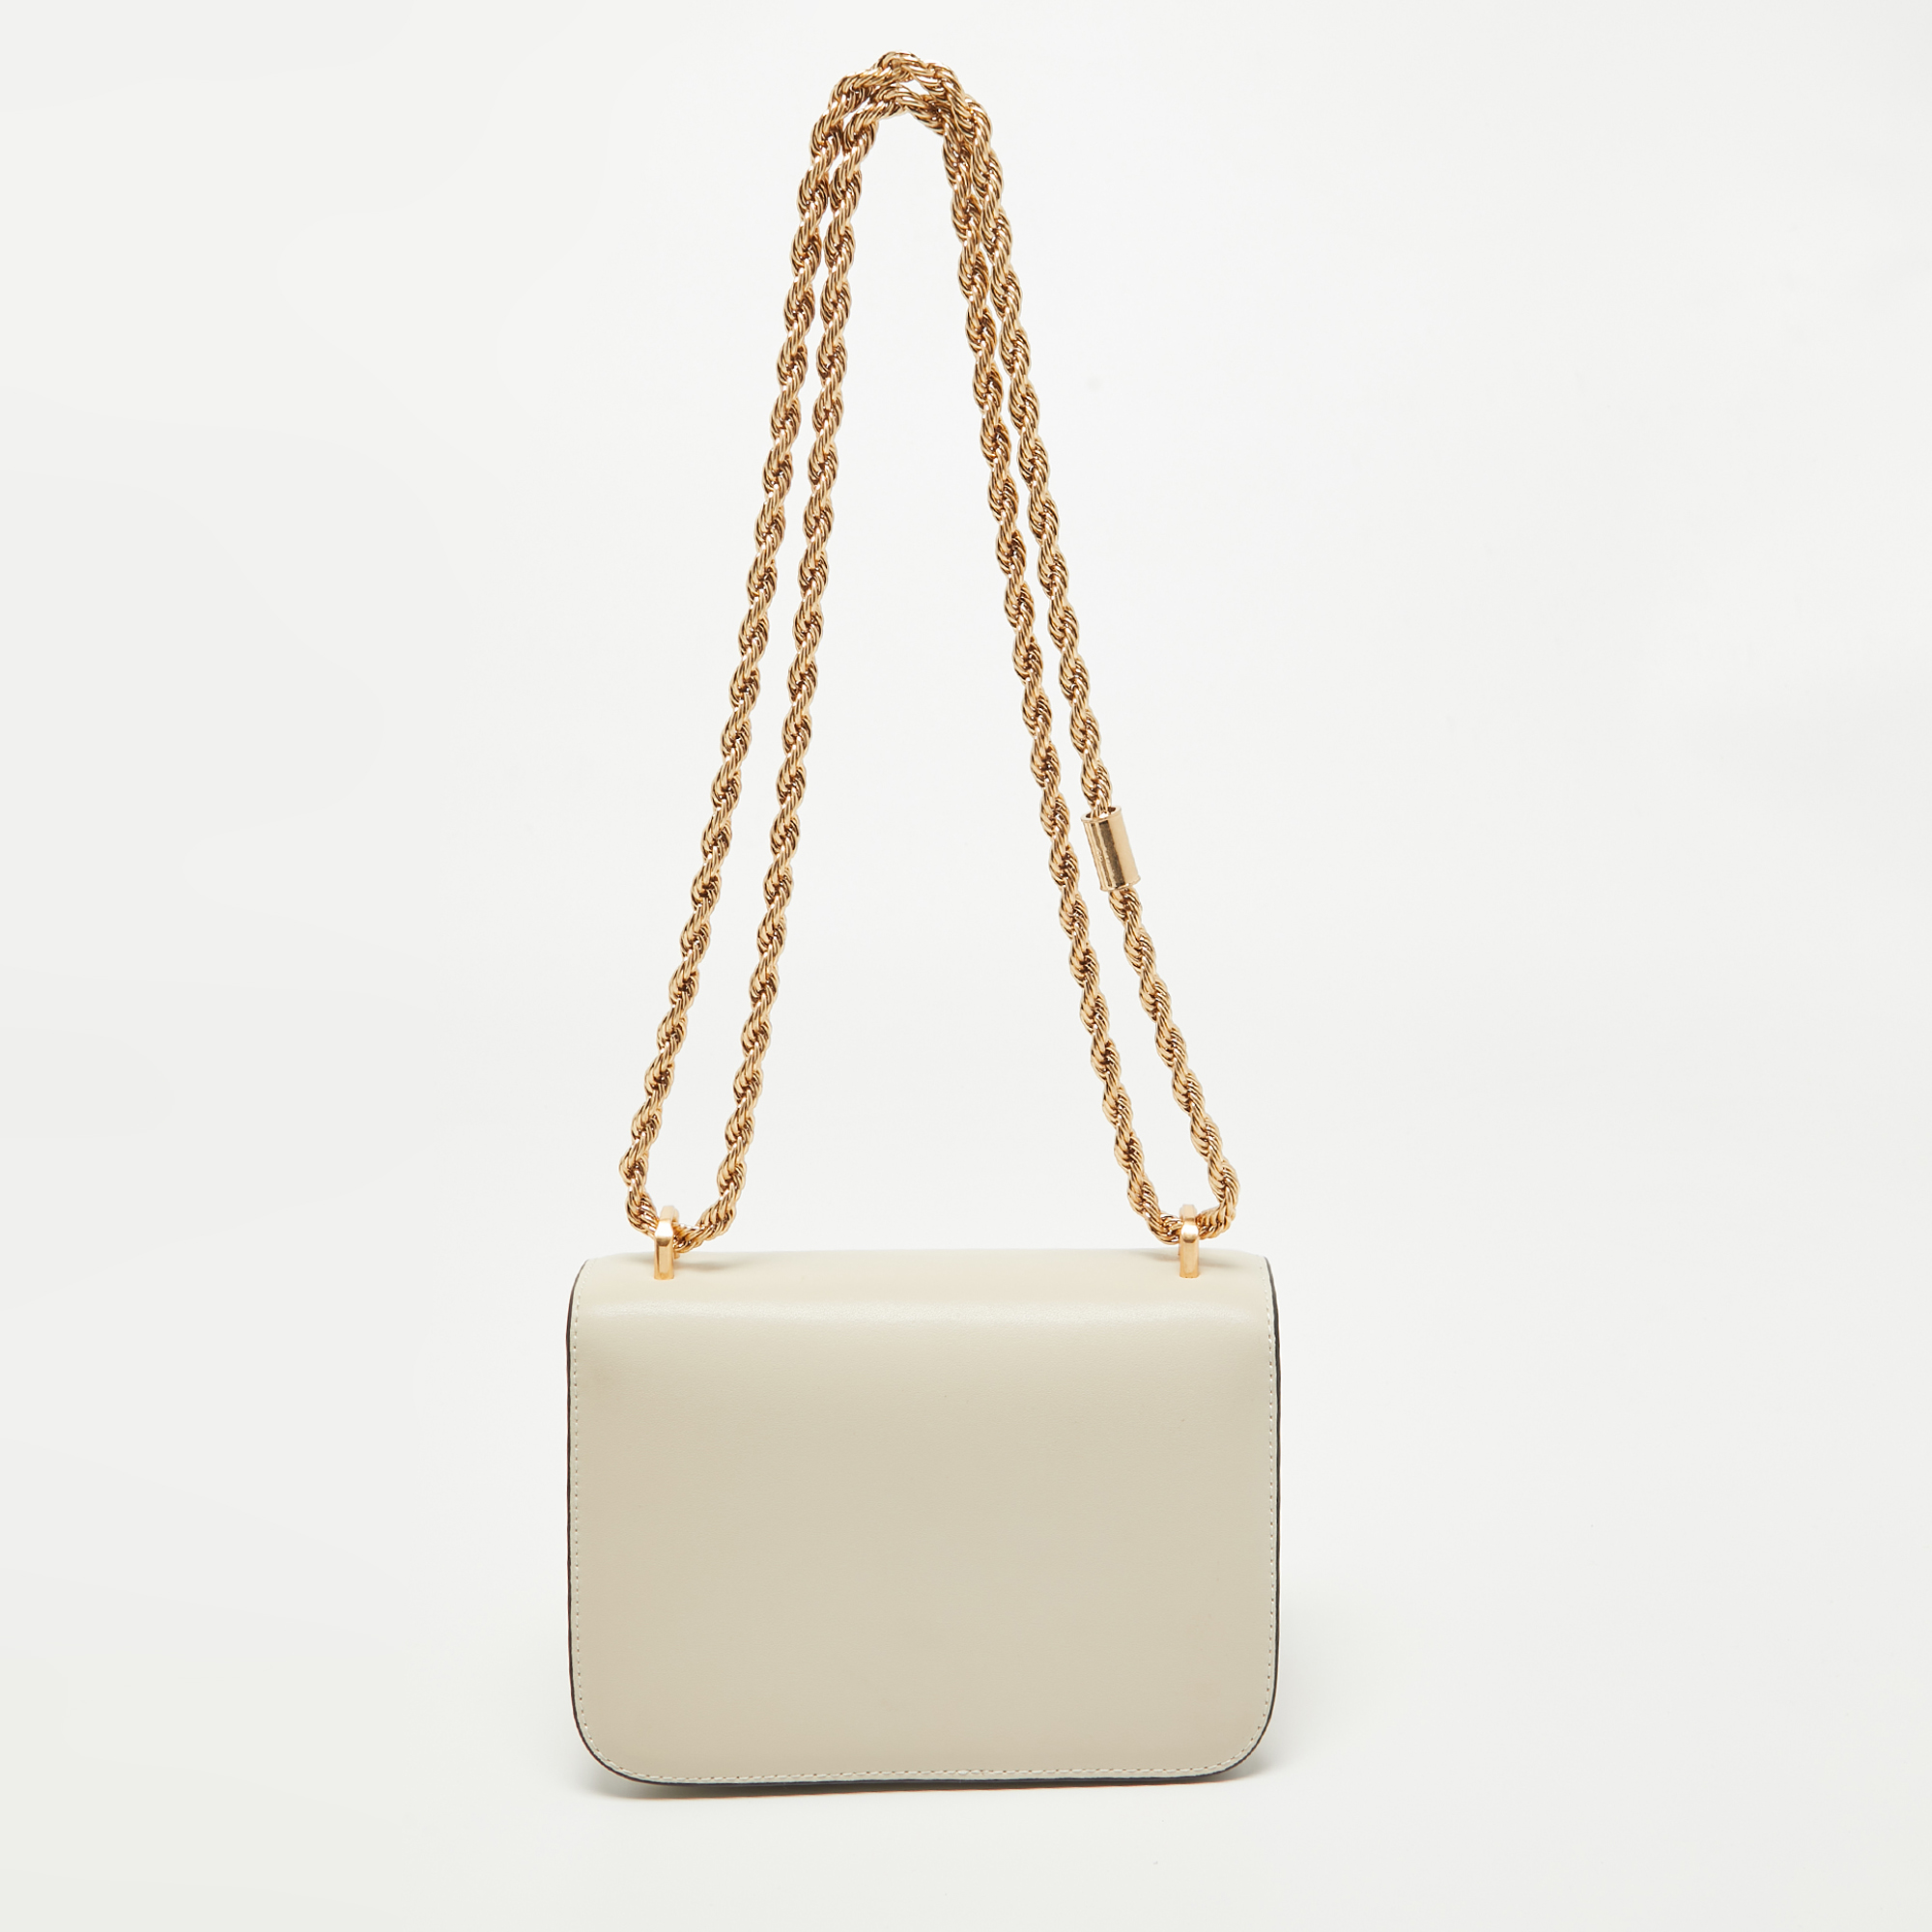 Tory Burch Light Beige Leather Small Eleanor Shoulder Bag